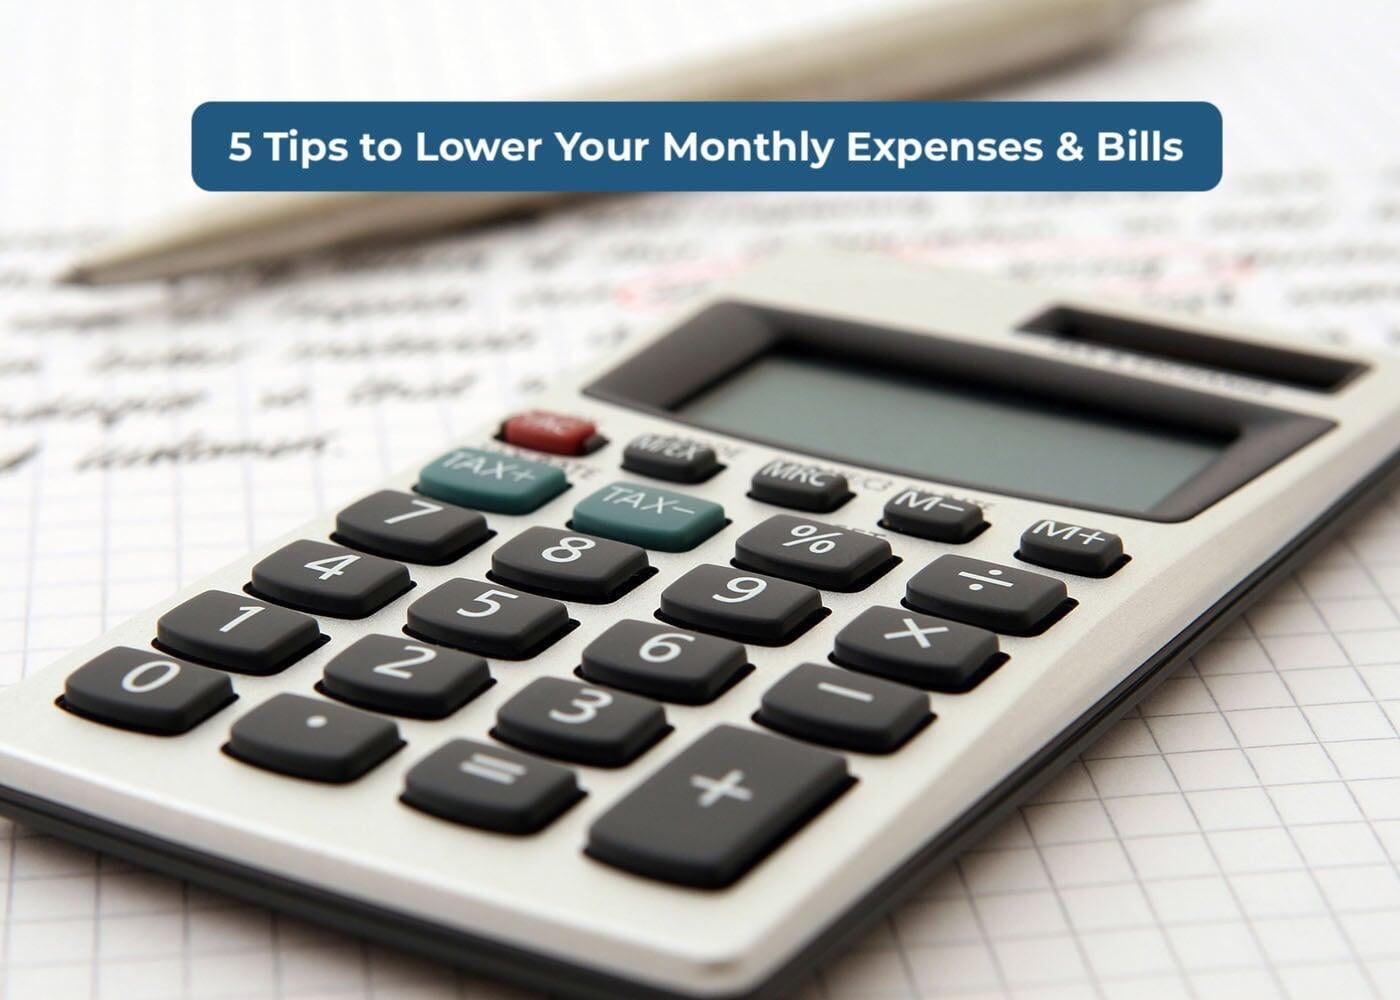 5 Tips to Cut Unnecessary Monthly Expenses and Bills